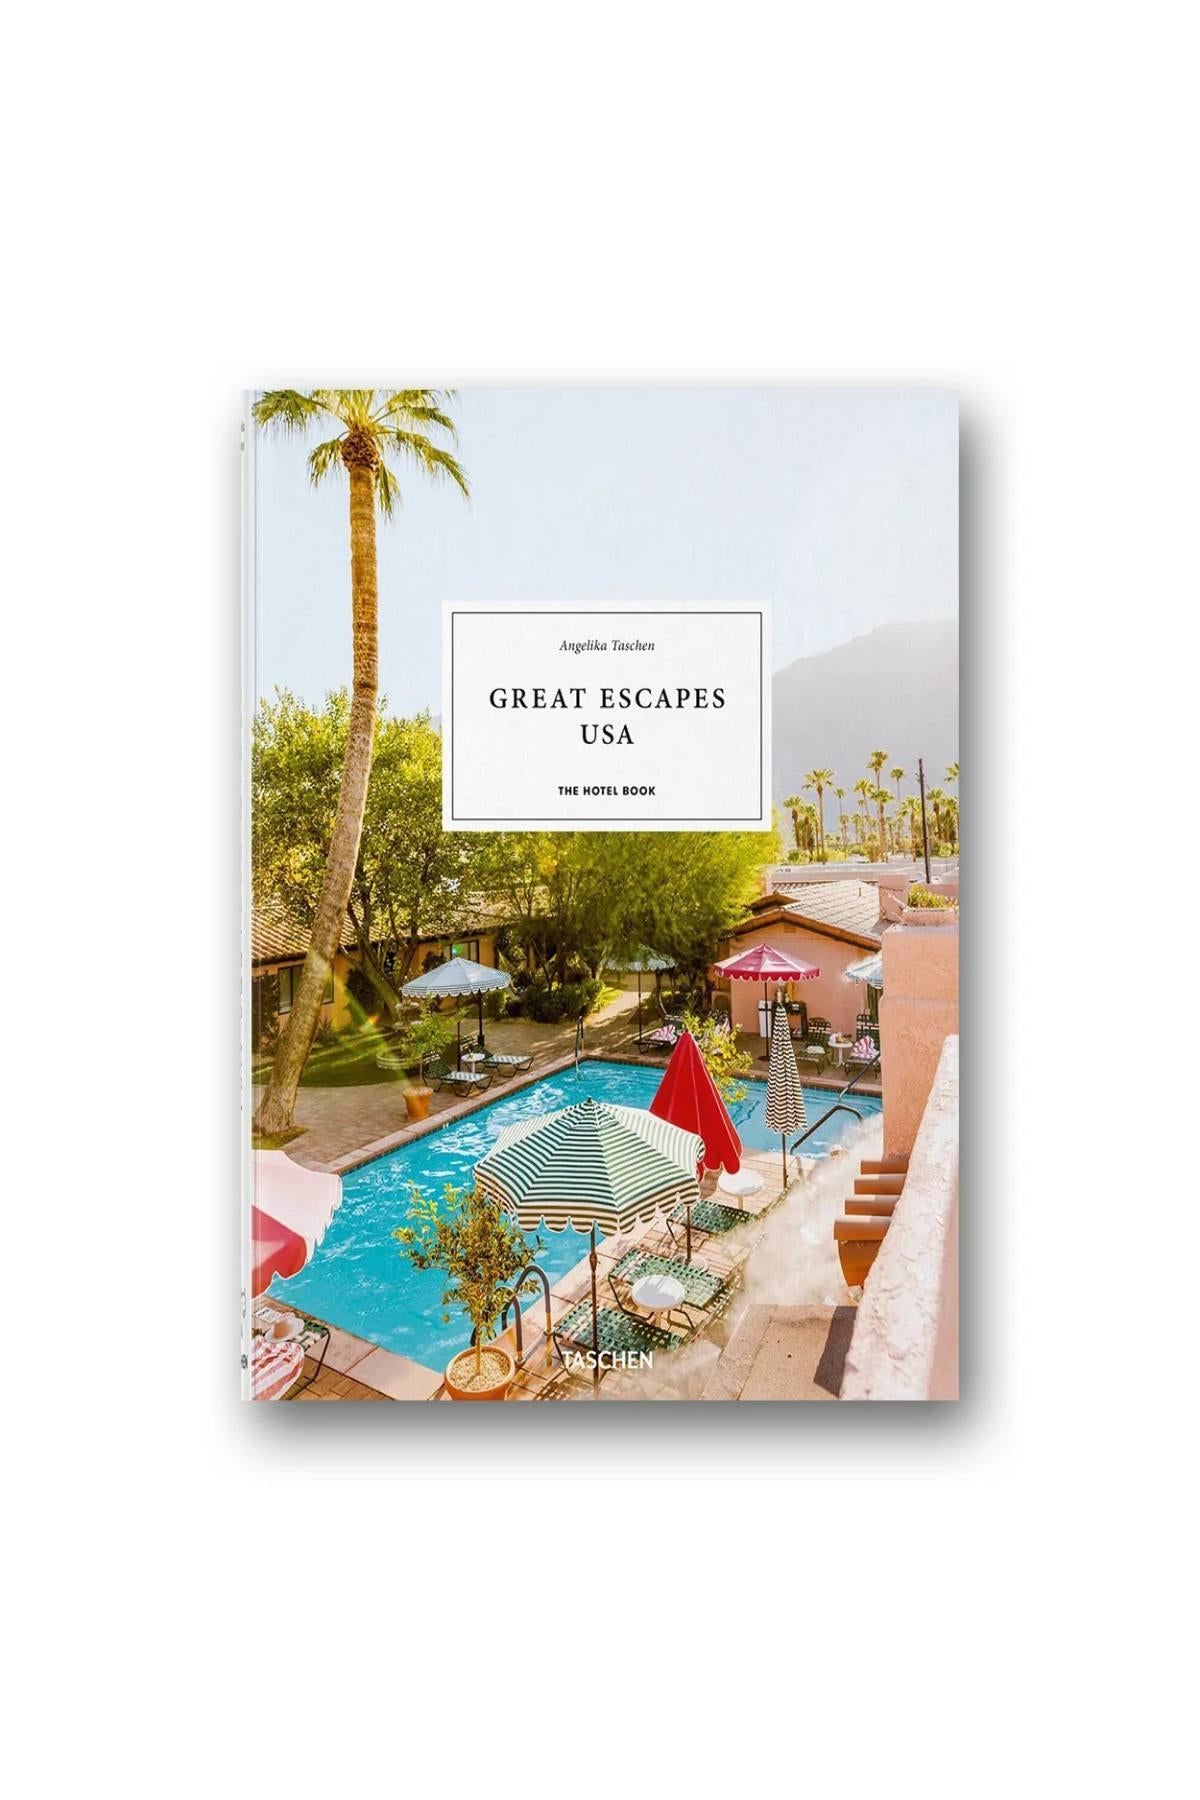 Great Escapes USA The Hotel Book 